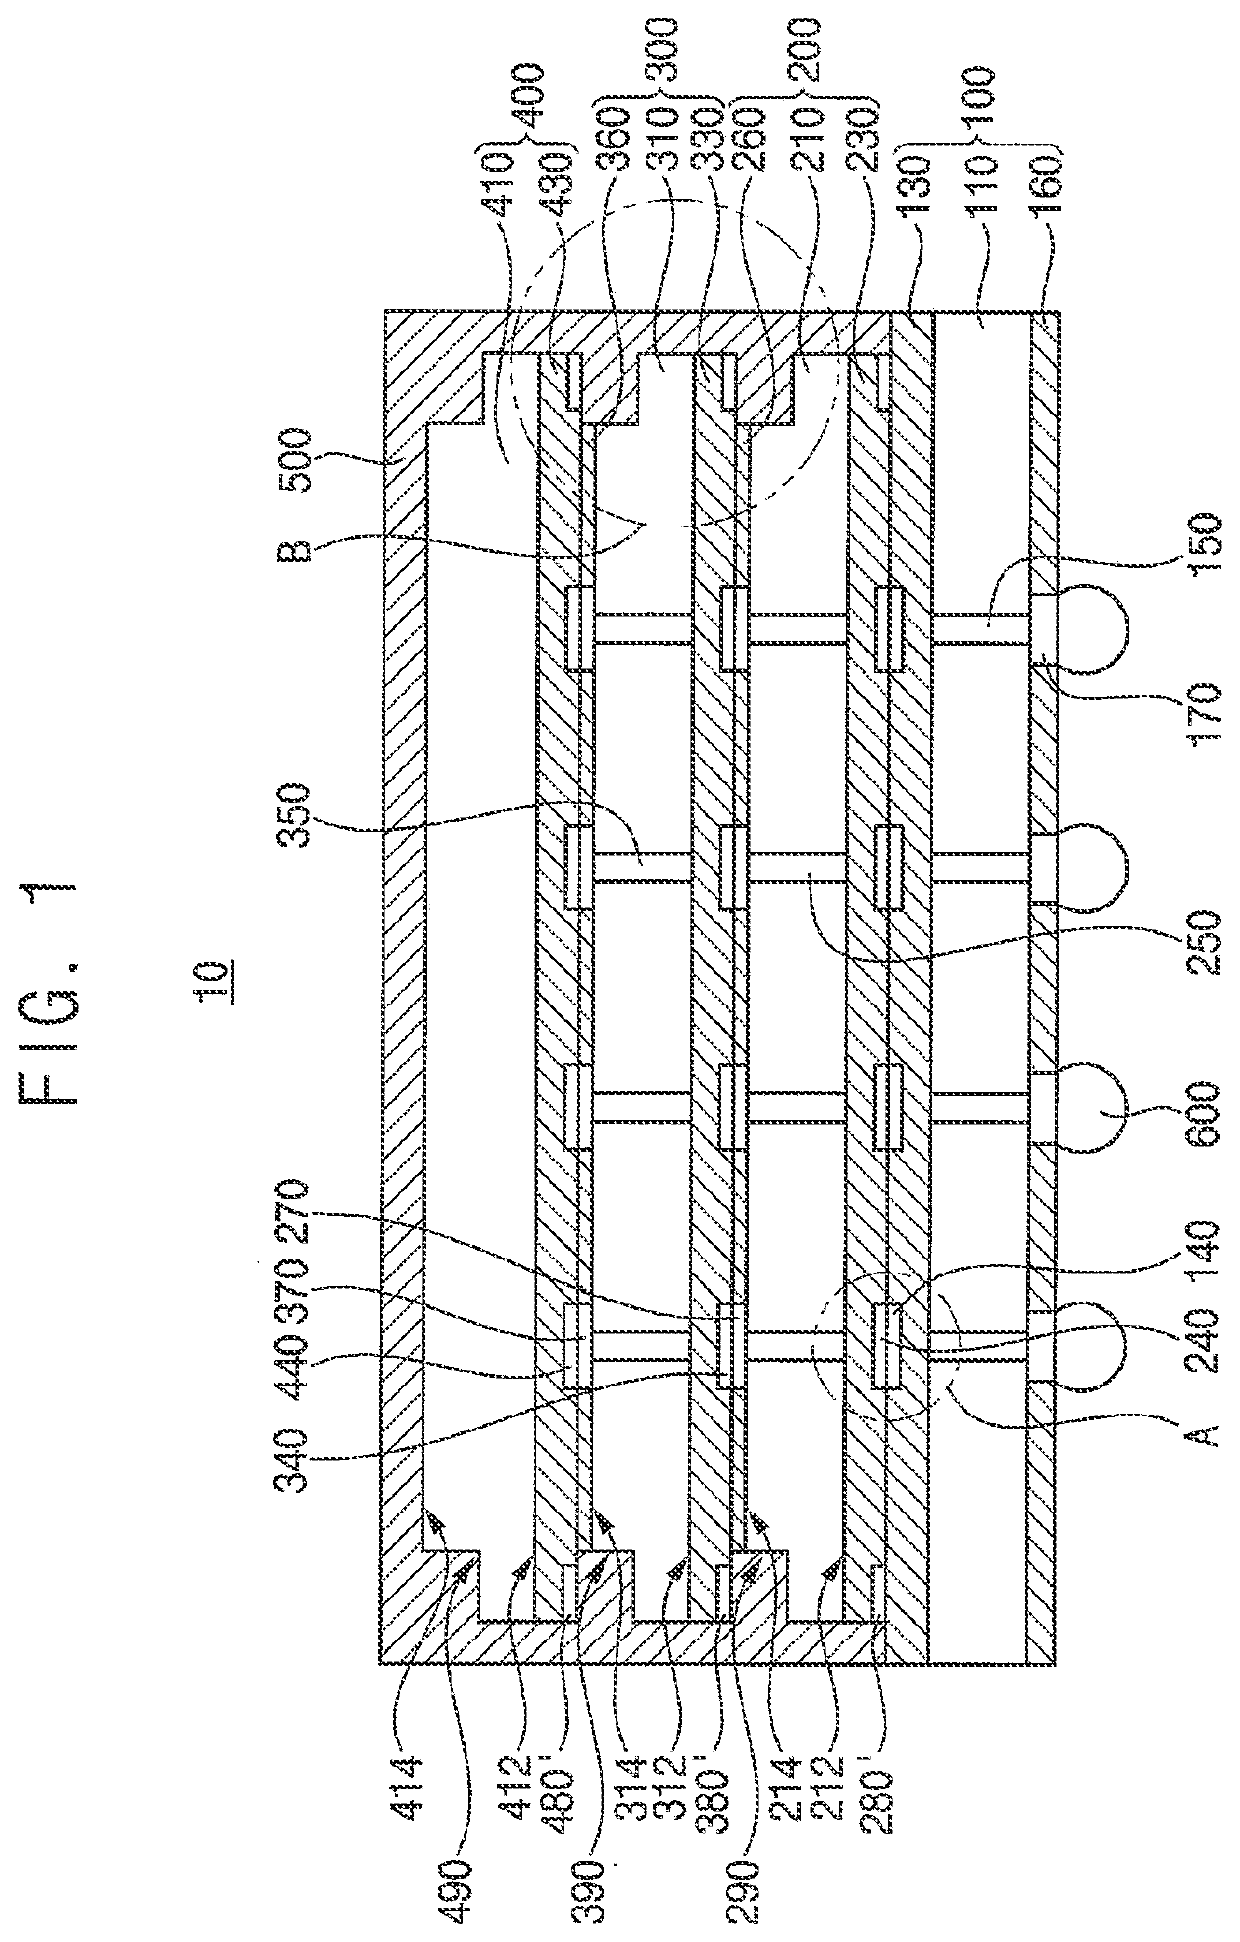 Semiconductor package and method of manufacturing the semiconductor package